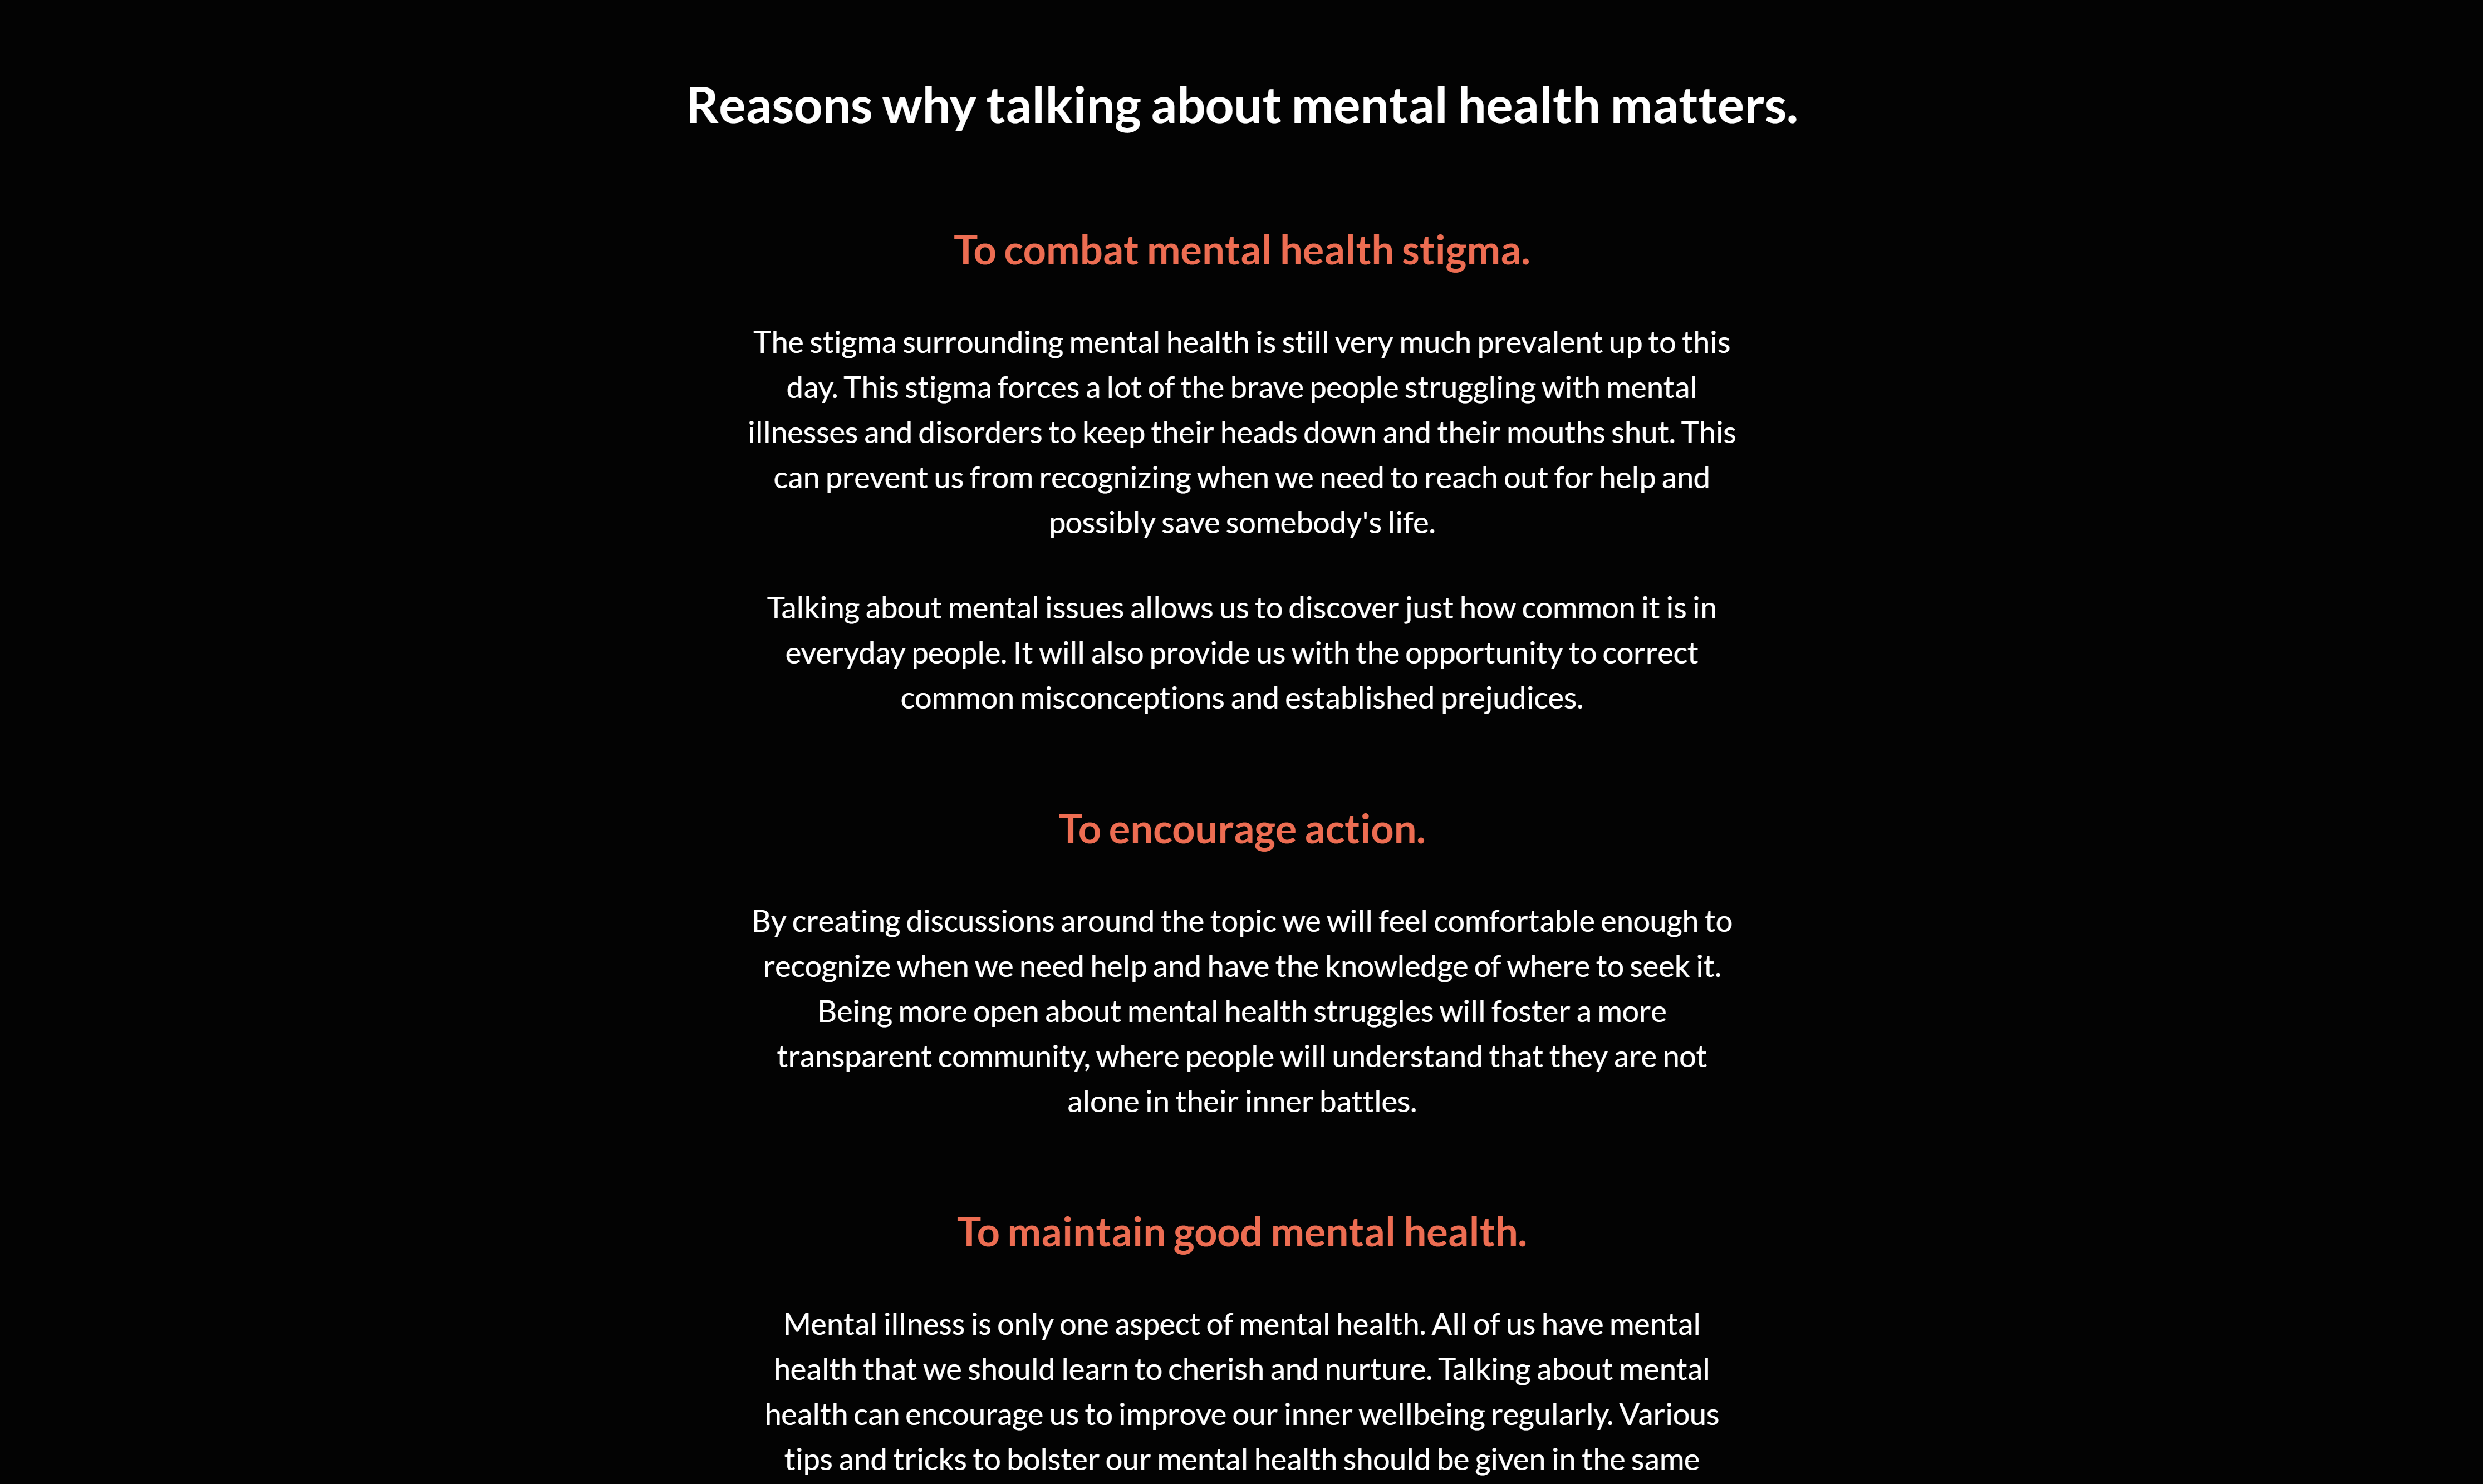 Image showing the first part of the 'Talking Mental Health Reasons' section of the 'Spread the Word' page